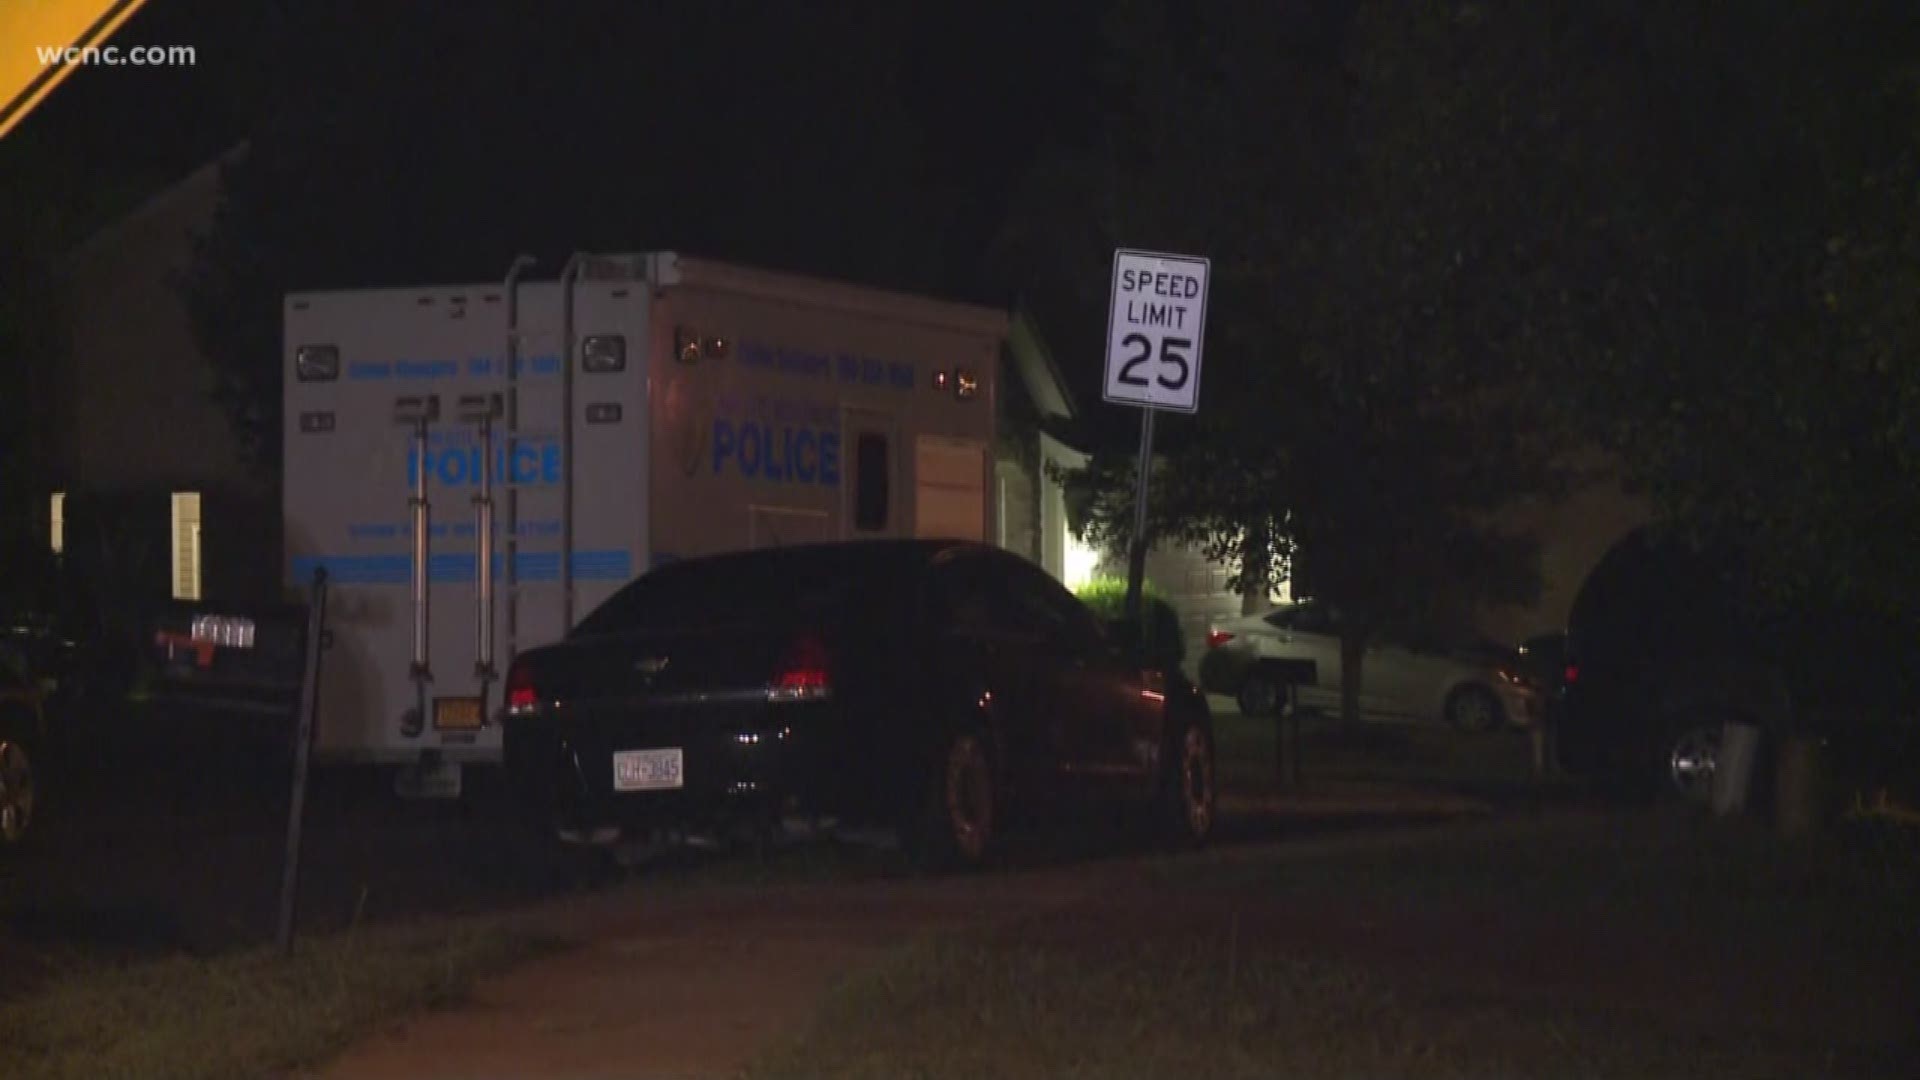 Charlotte-Mecklenburg Police are investigating the city's 59th homicide after a person was found dead on Gold Pan Road in northeast Charlotte early Tuesday morning.